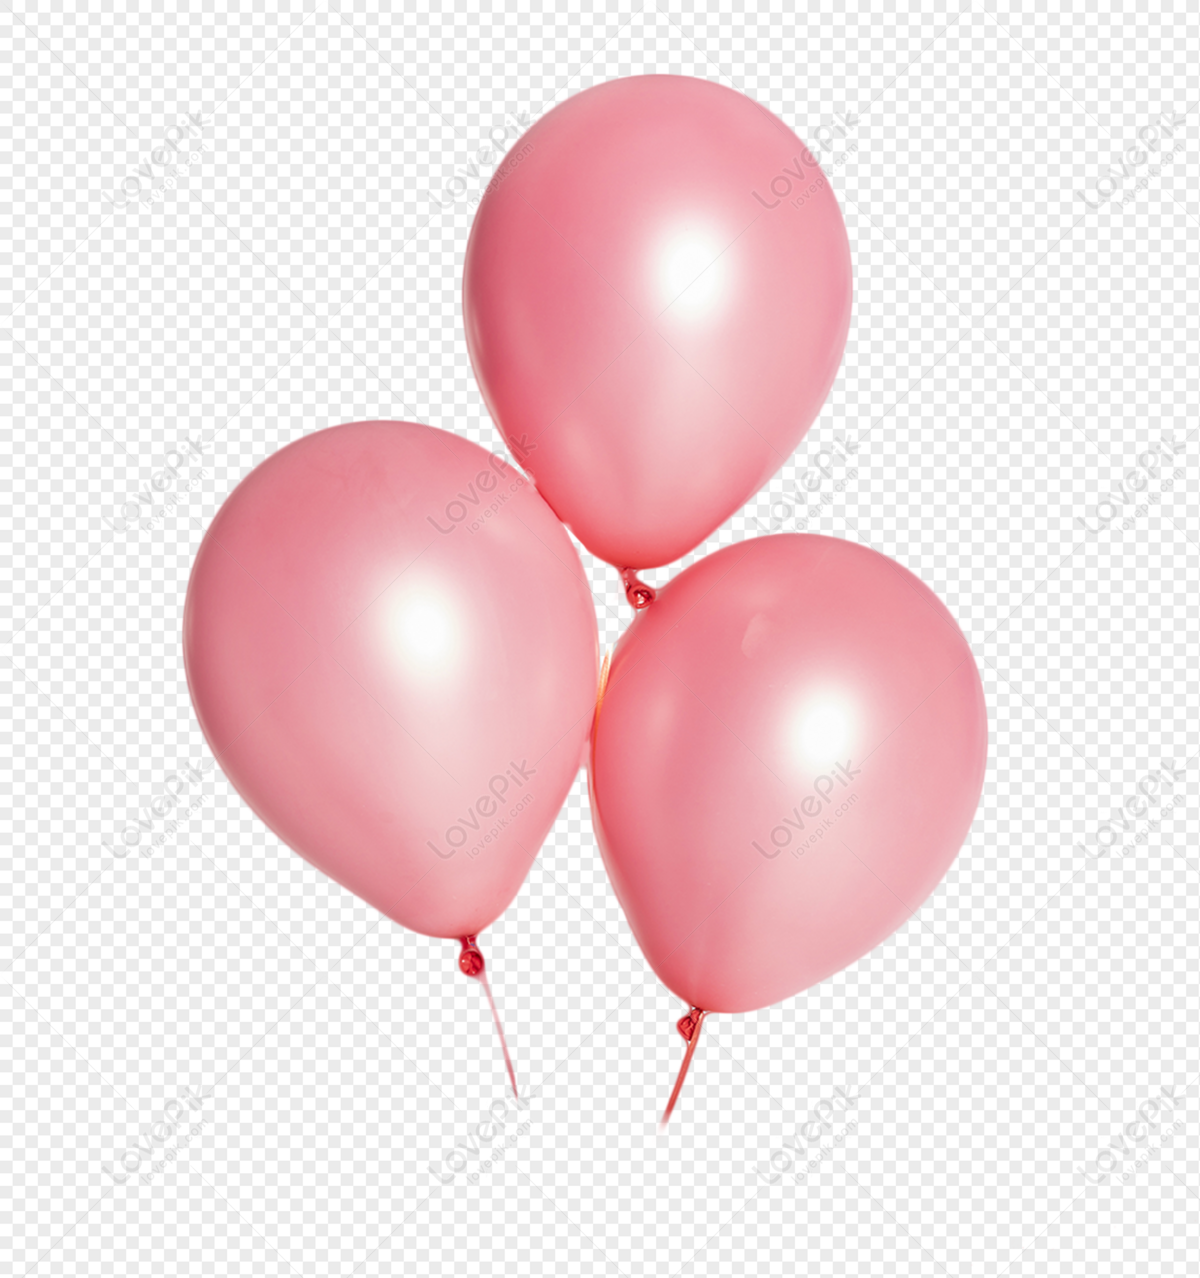 Balloon Pink Free PNG And Clipart Image For Free Download - Lovepik |  401432899